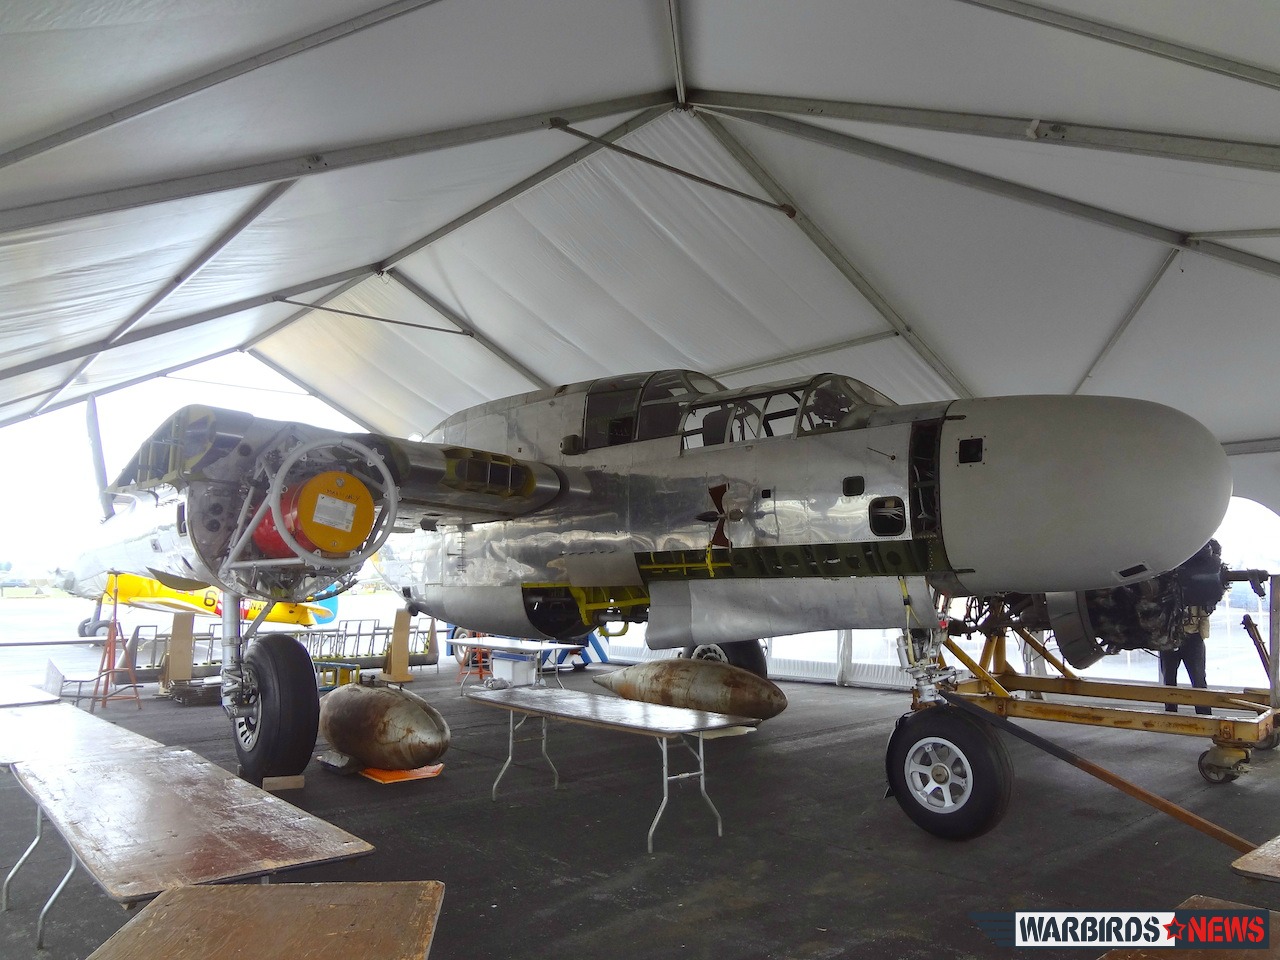 The P-61 Black Widow how it looked like in June 2103. Accordingly to the museum's director Russ Strine the aircraft looks the same now as they are working on the internal systems.